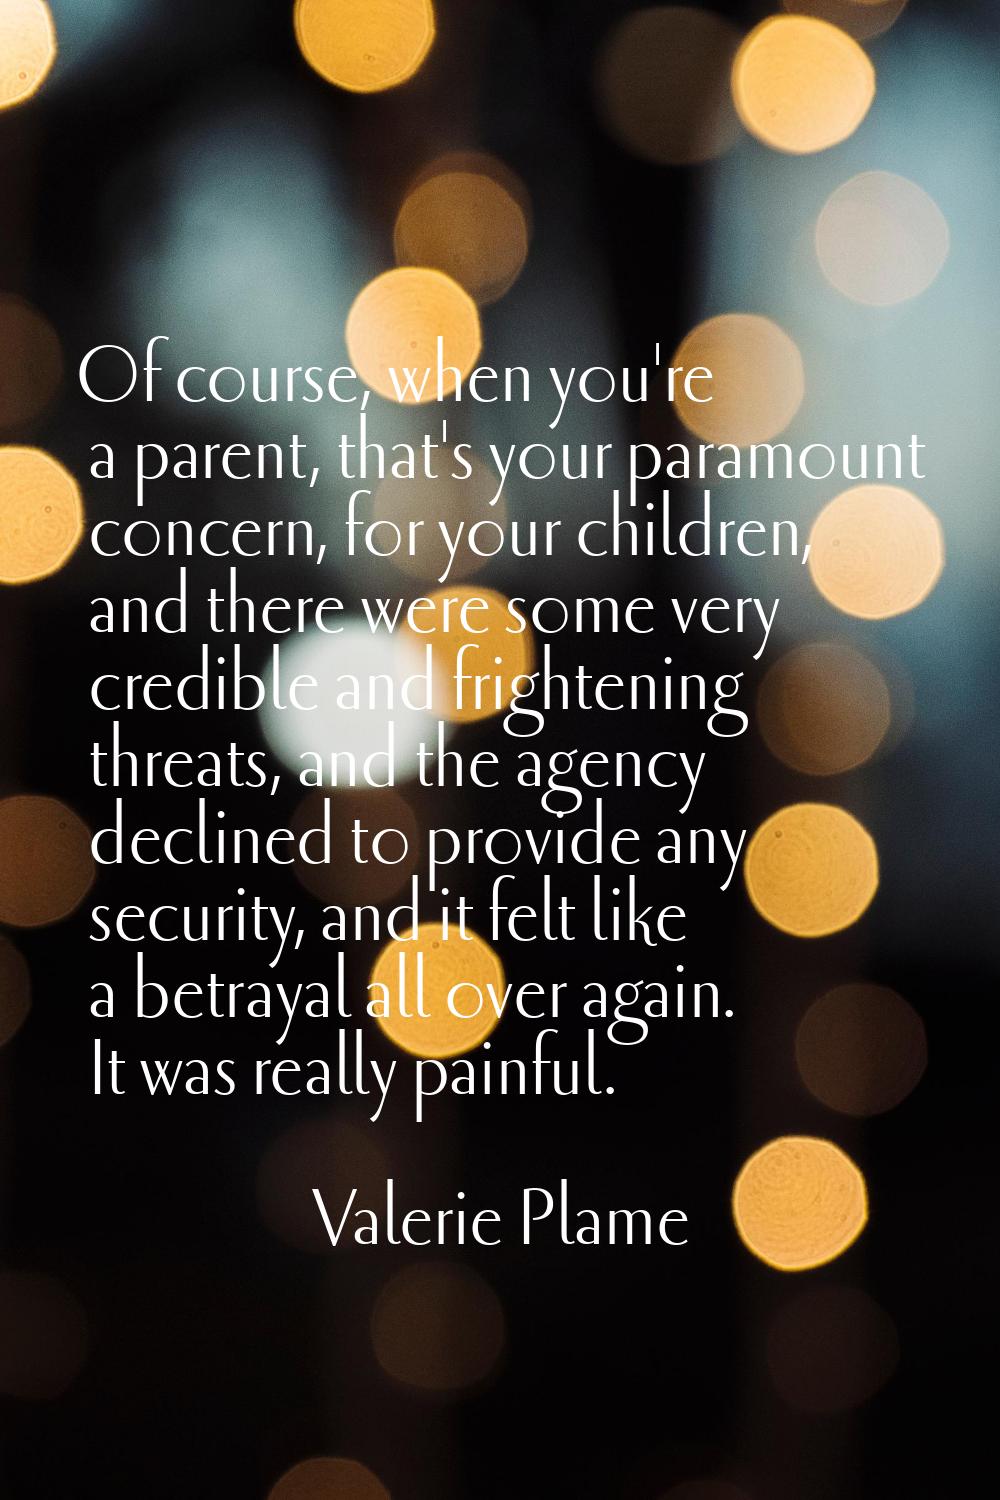 Of course, when you're a parent, that's your paramount concern, for your children, and there were s